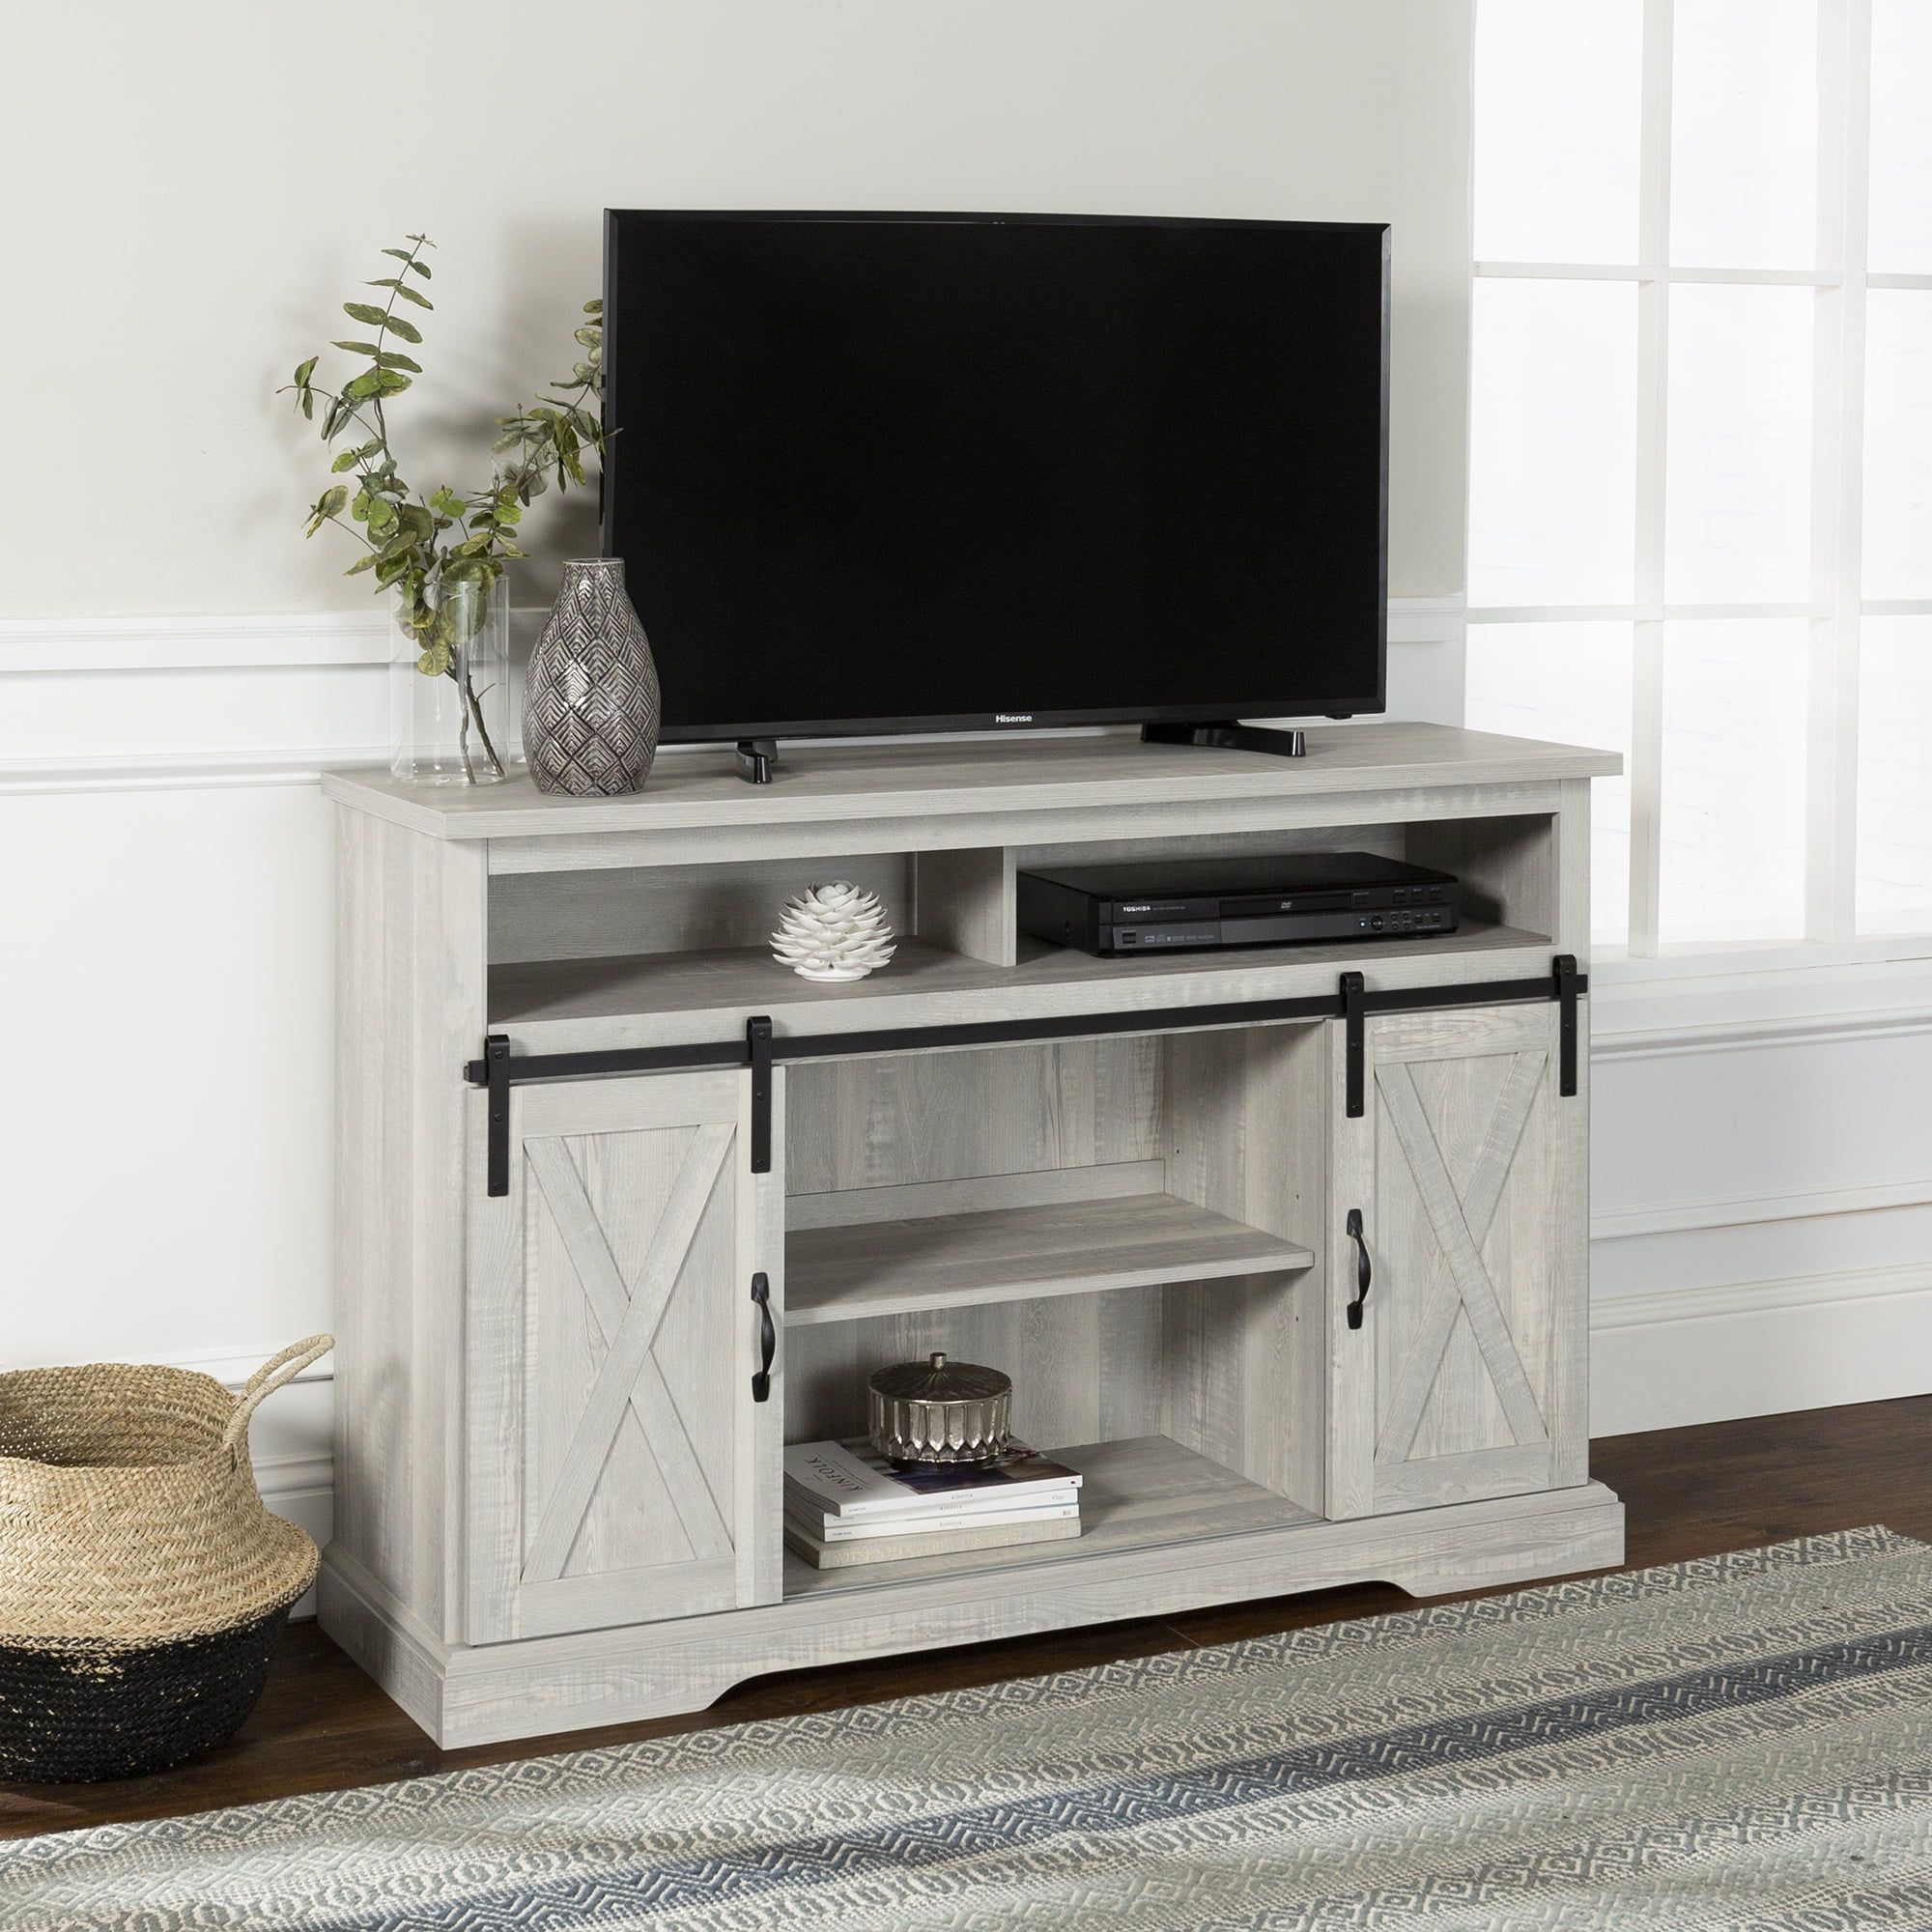 Manor Park Farmhouse Barn Door Tv Stand For Tvs Up To 58", Stone Grey Throughout Farmhouse Tv Stands (Gallery 11 of 20)